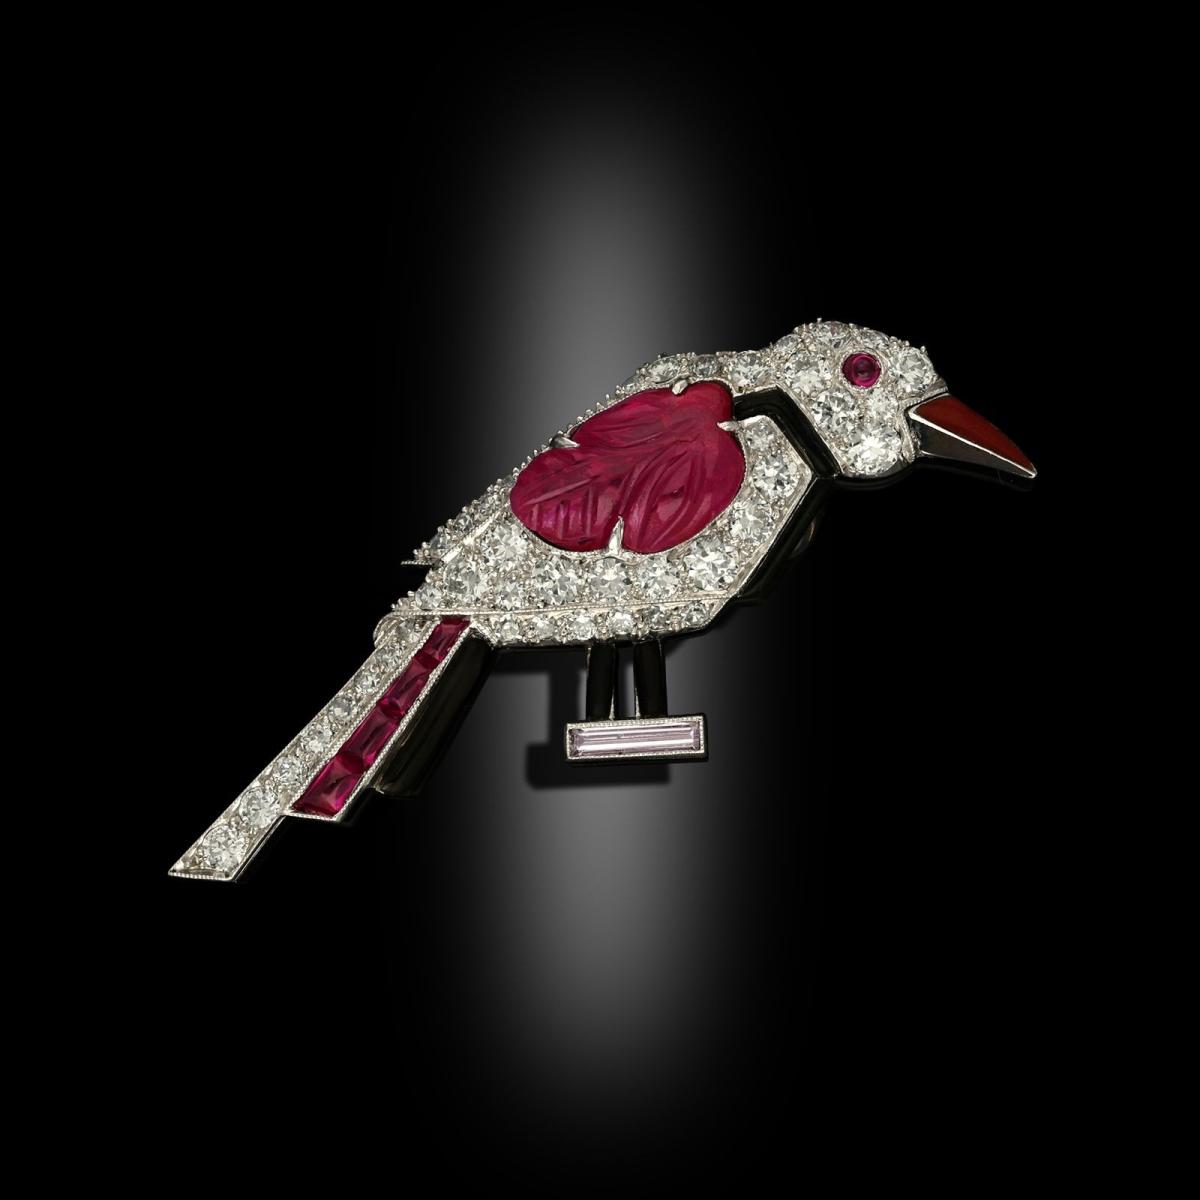 Cartier Art Deco Stylised Diamond And Carved Ruby Bird Brooch Circa 1925 London